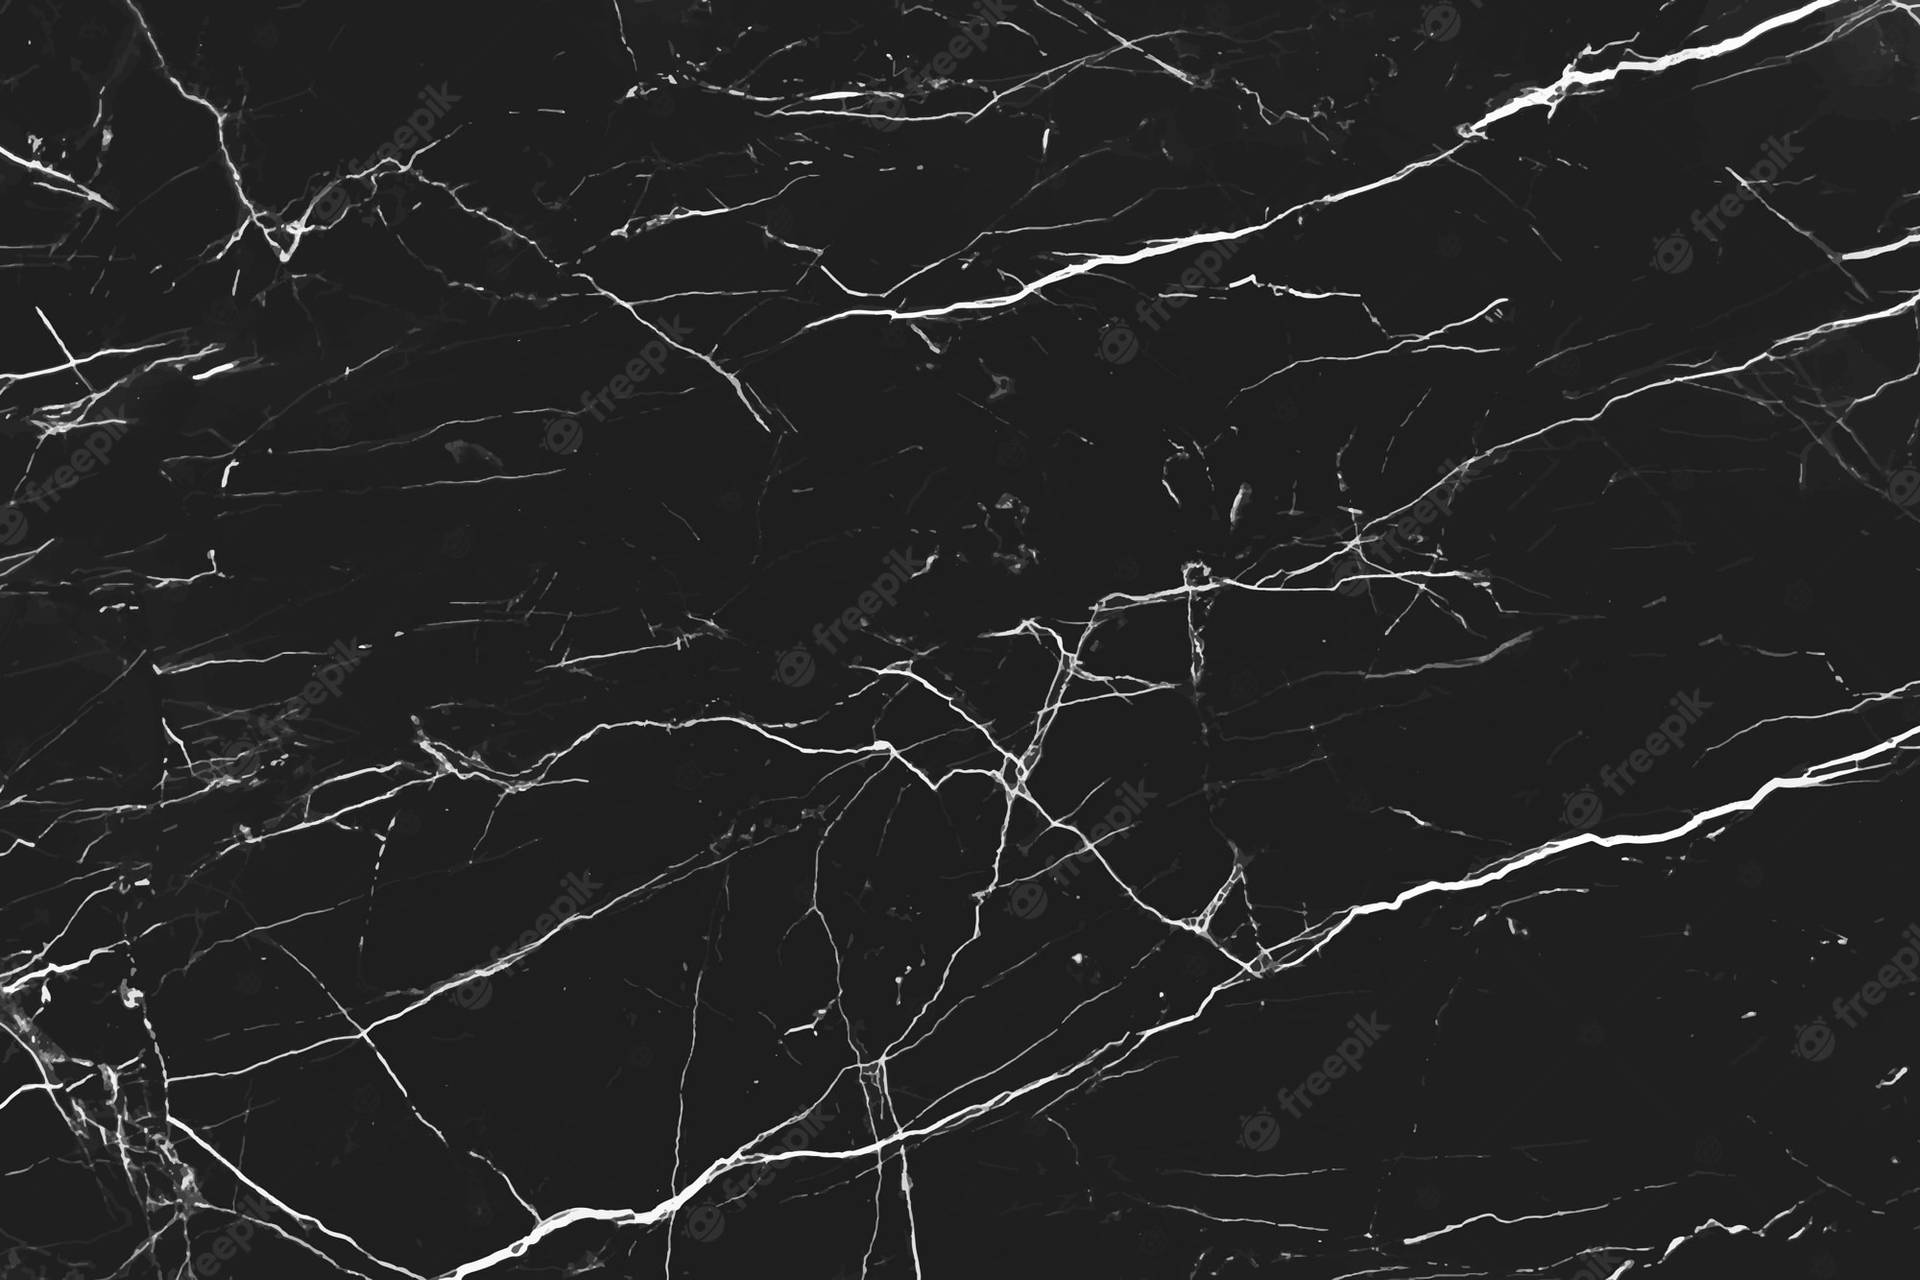 Experience 4K Black Marble with this high-resolution wallpaper. Wallpaper